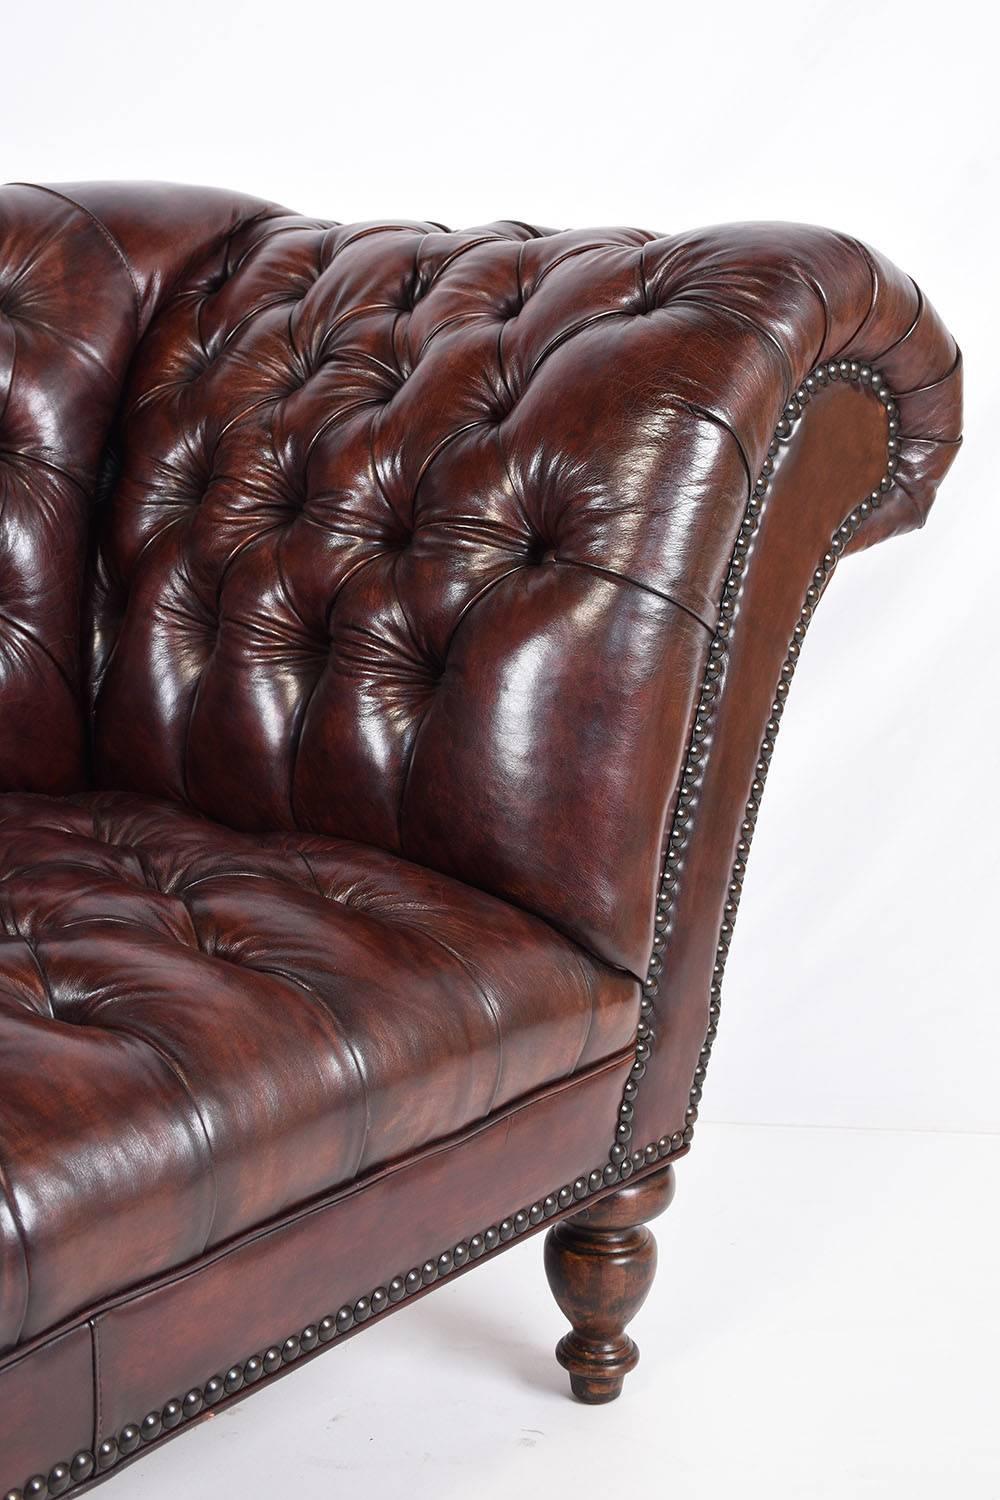 Vintage Chesterfield Tufted Leather Sofa 1